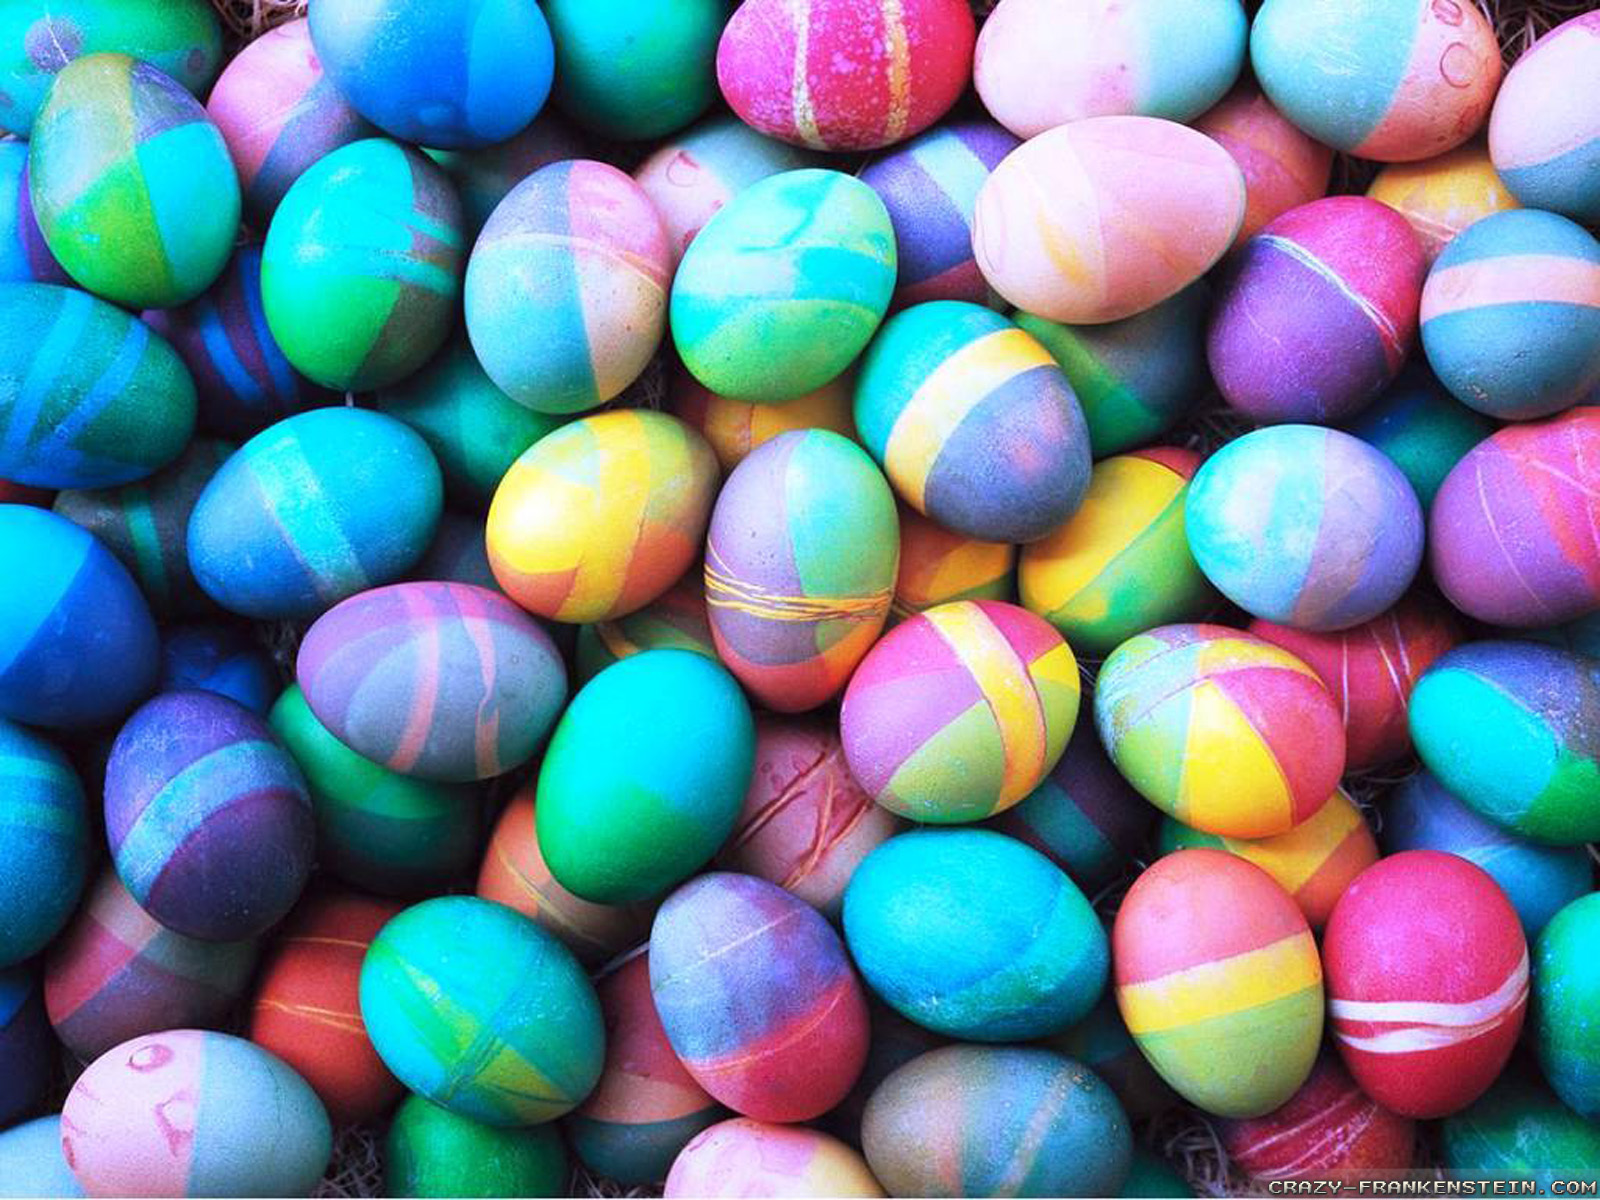 Colorful Easter Egg Desktop Background Wallpapers Download 1600x1200px